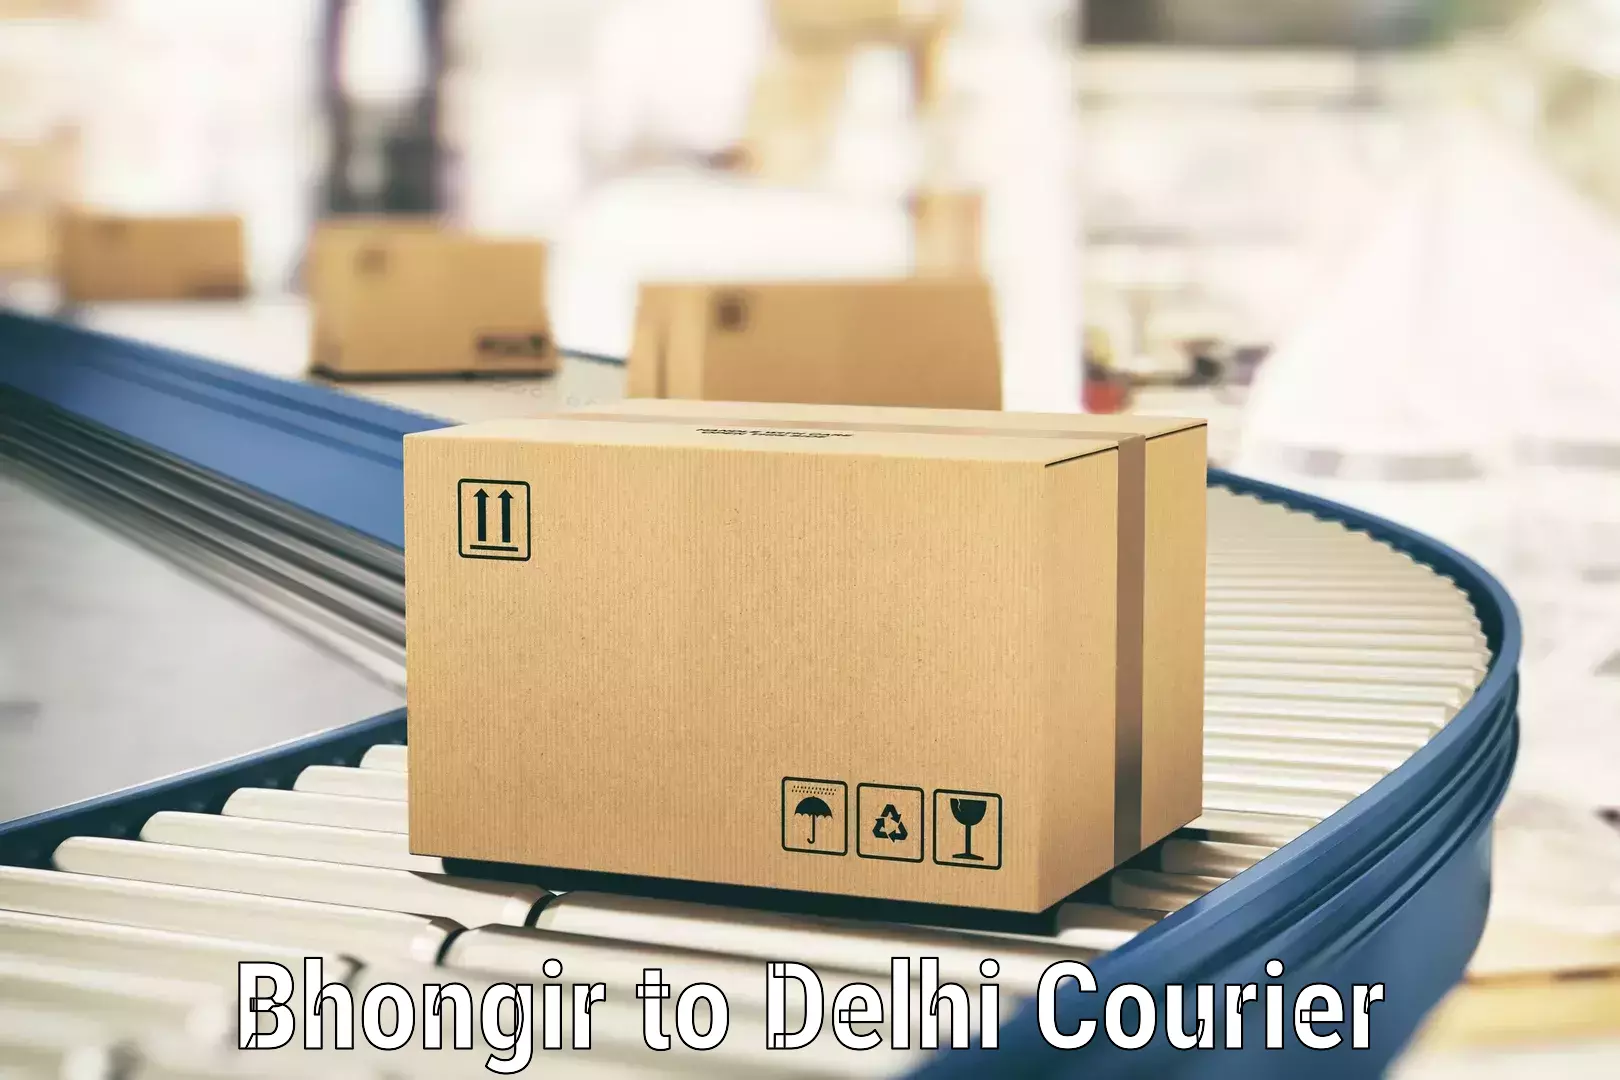 Efficient package consolidation Bhongir to University of Delhi